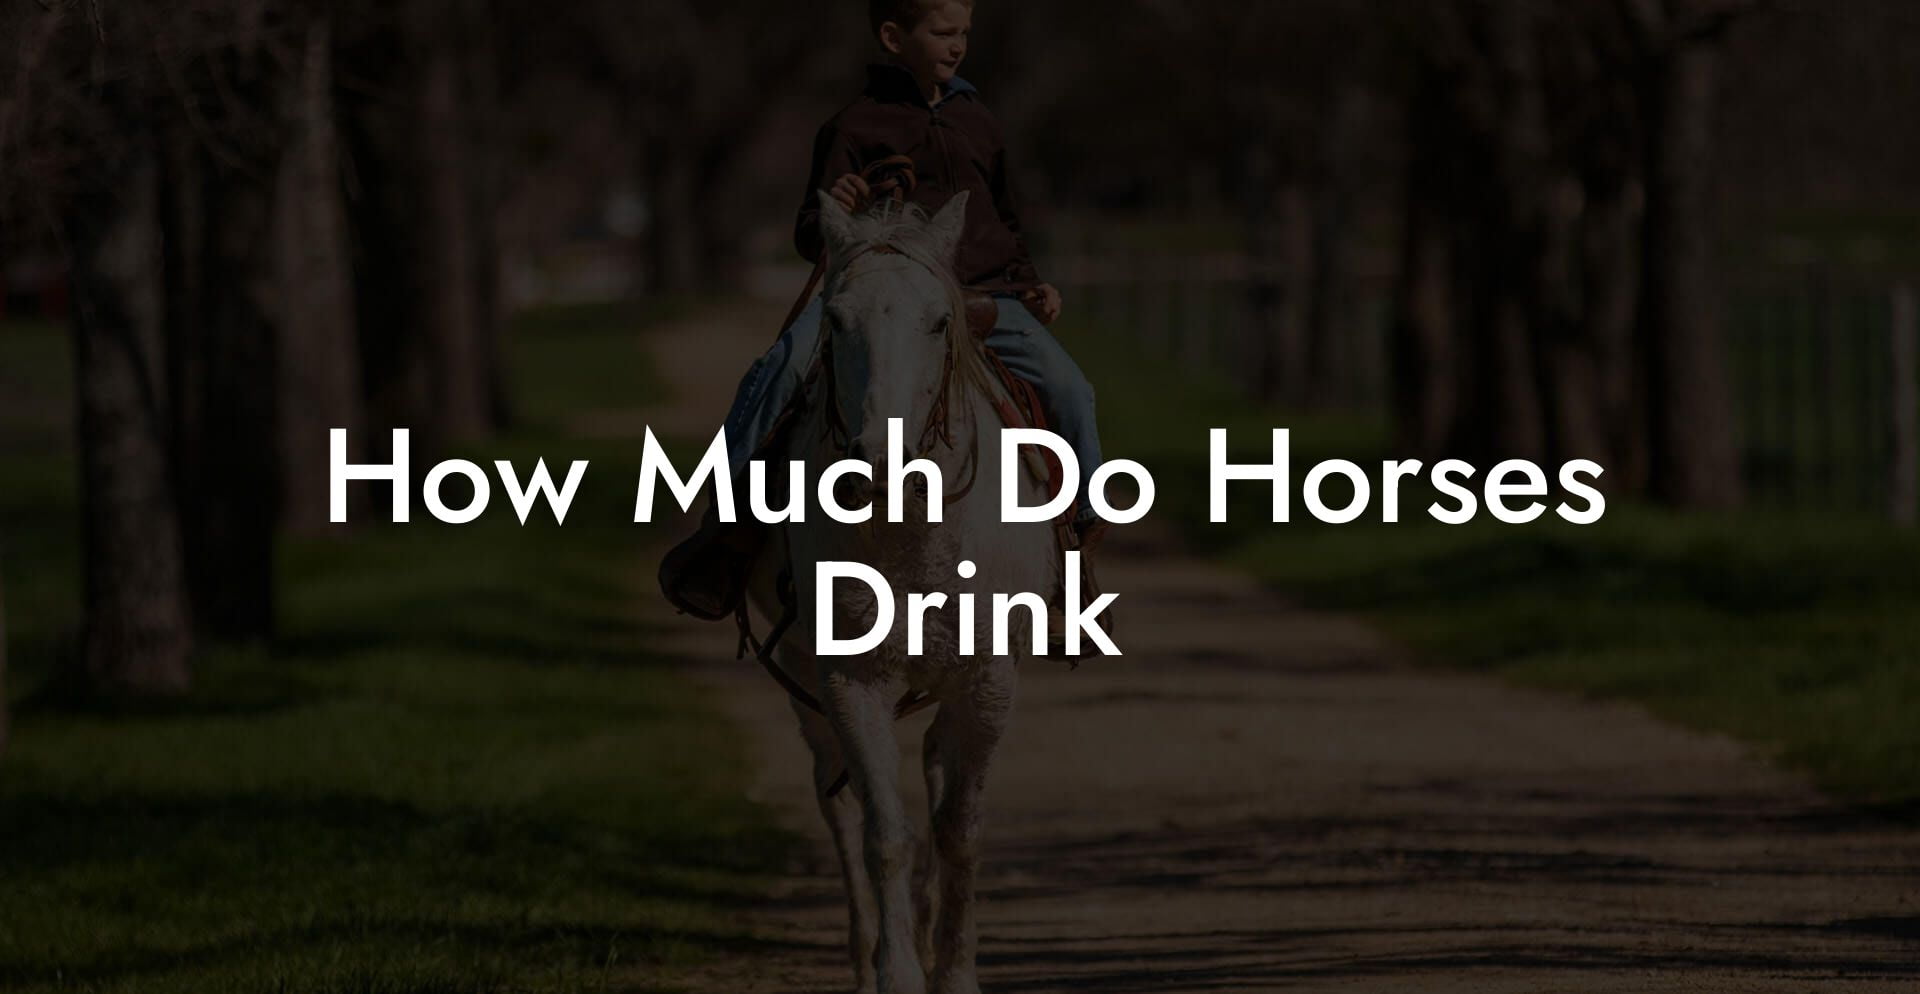 How Much Do Horses Drink